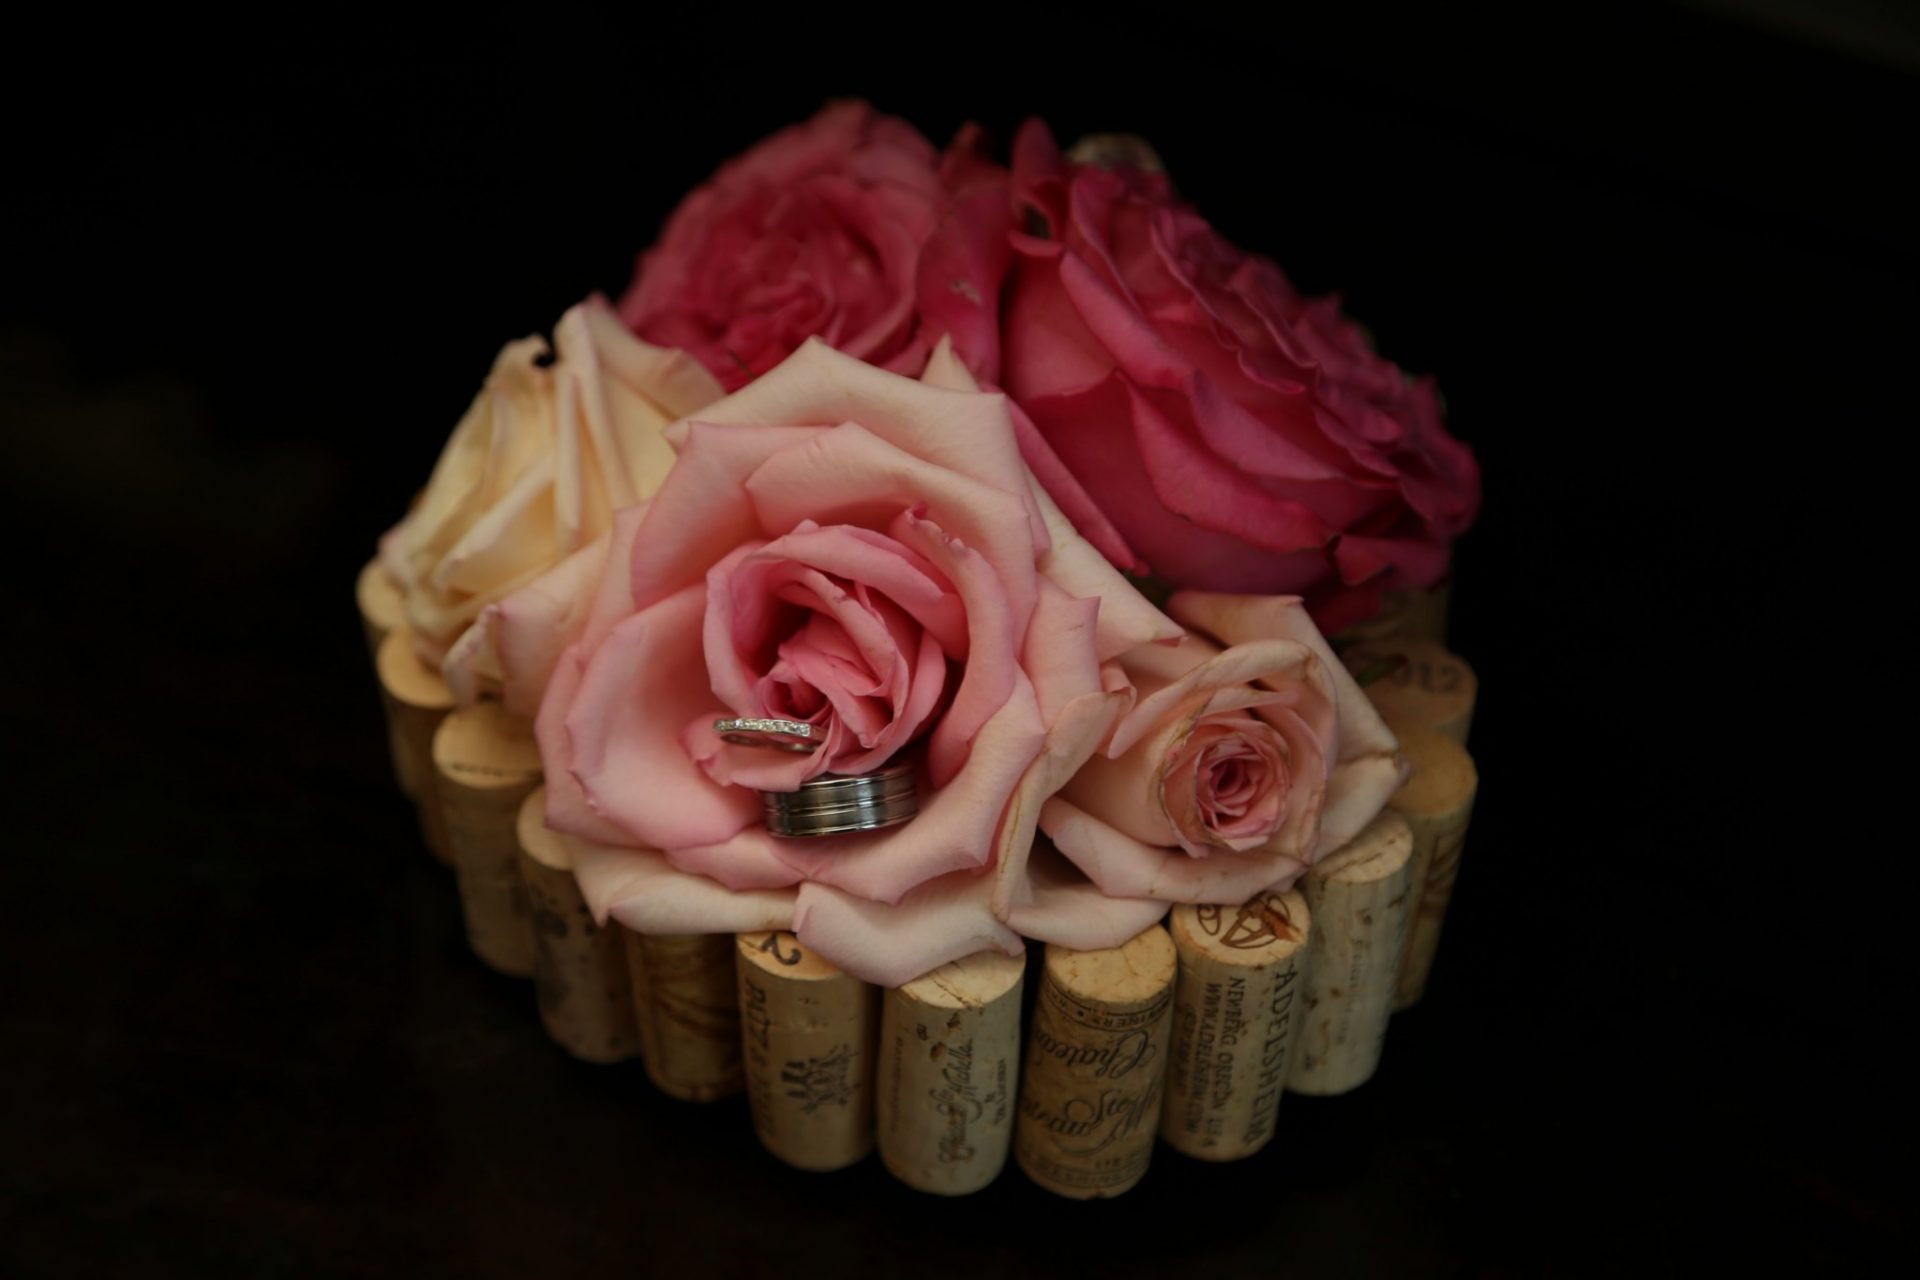 Wedding decoration with wine corks and flowers